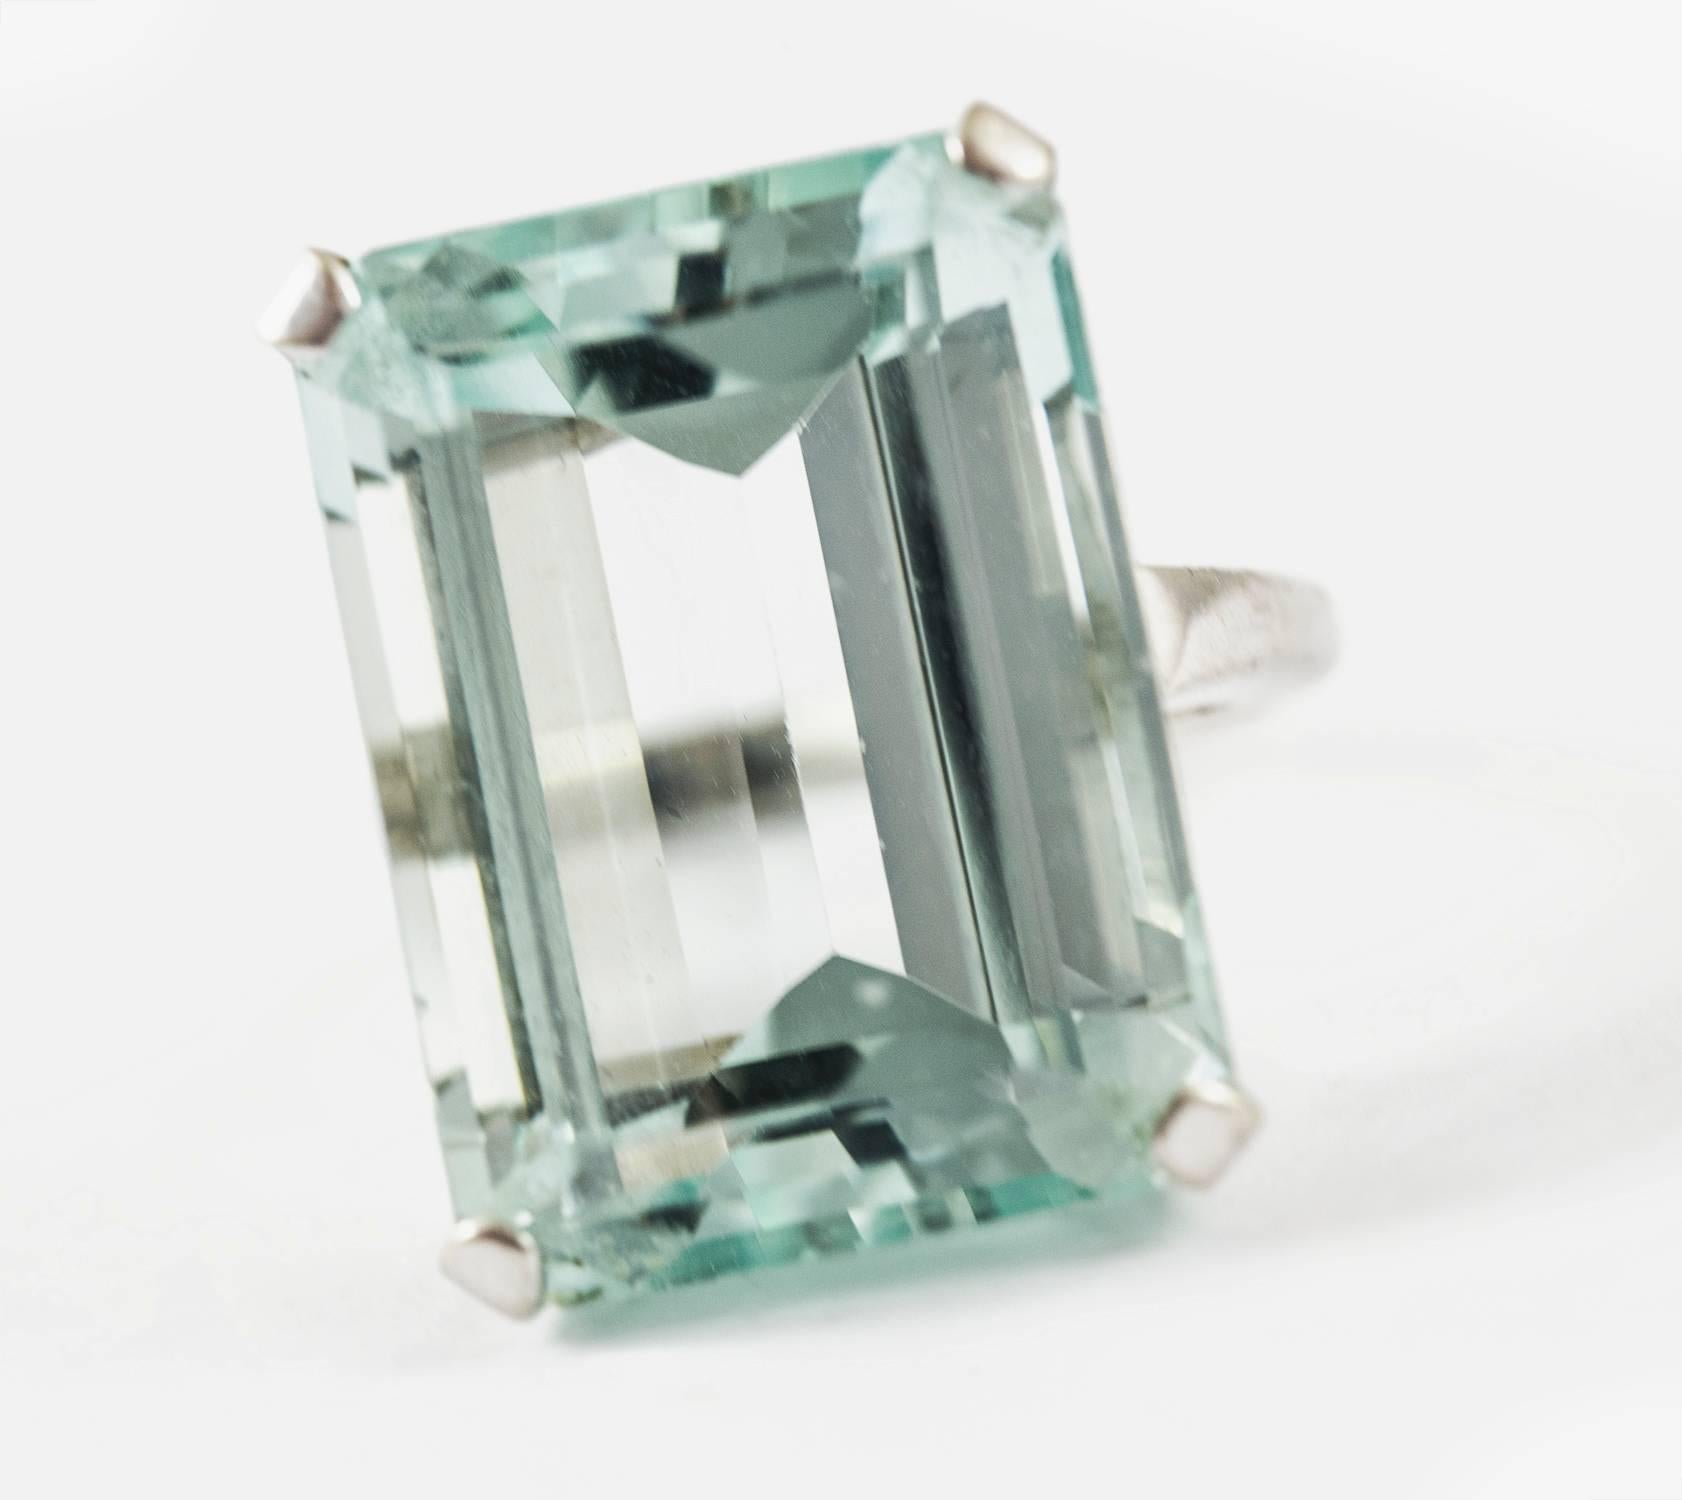 This fine aquamarine ring is set in 14k white gold. It holds an icy, transparent sparkling aquamarine, weighing 27 cts. The colour is classified as strongly greenish blue with a medium-light tone. It is eye clean. This ring is classic, elegant and